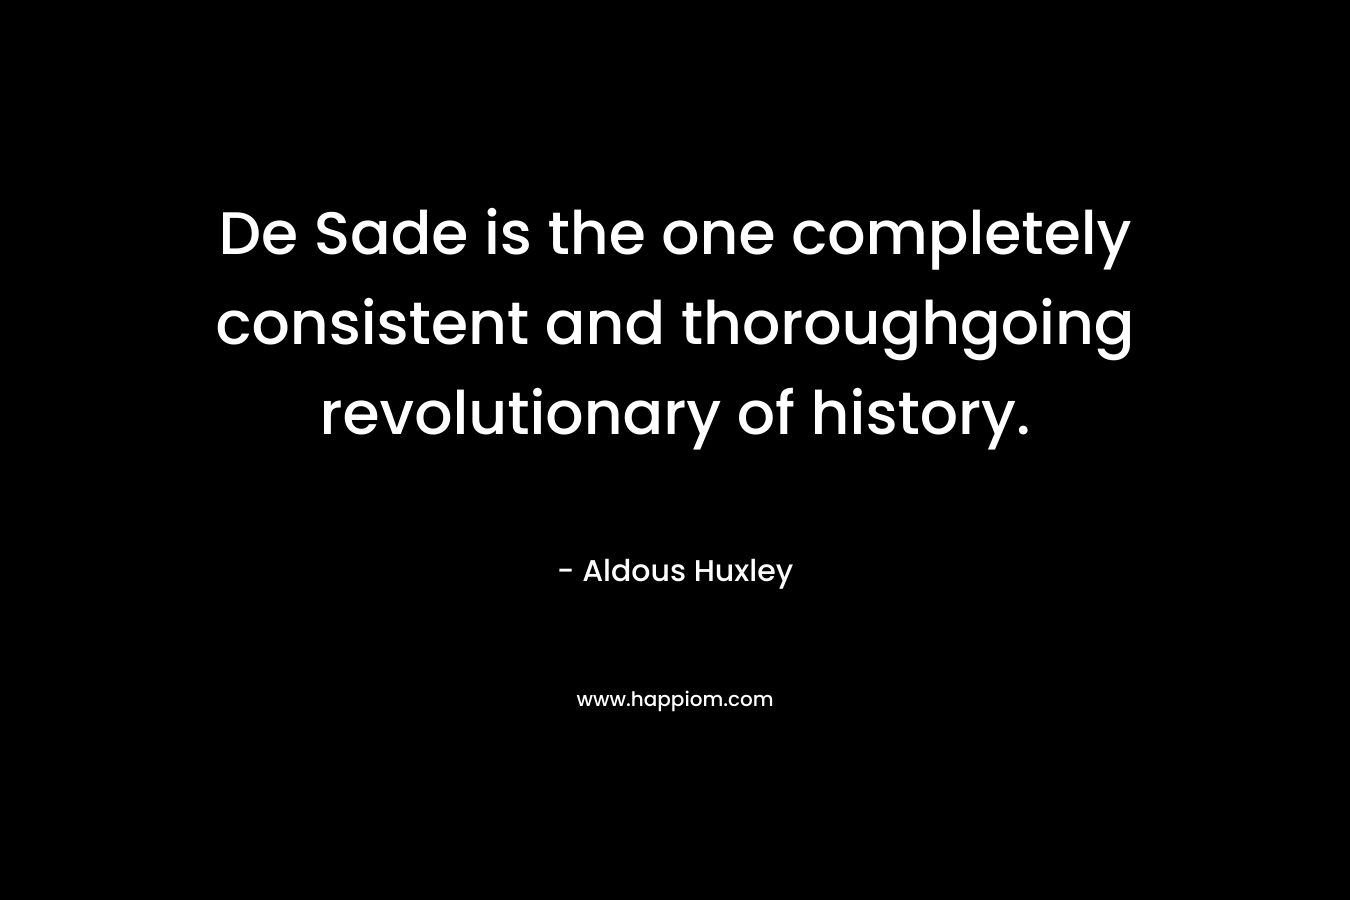 De Sade is the one completely consistent and thoroughgoing revolutionary of history. – Aldous Huxley